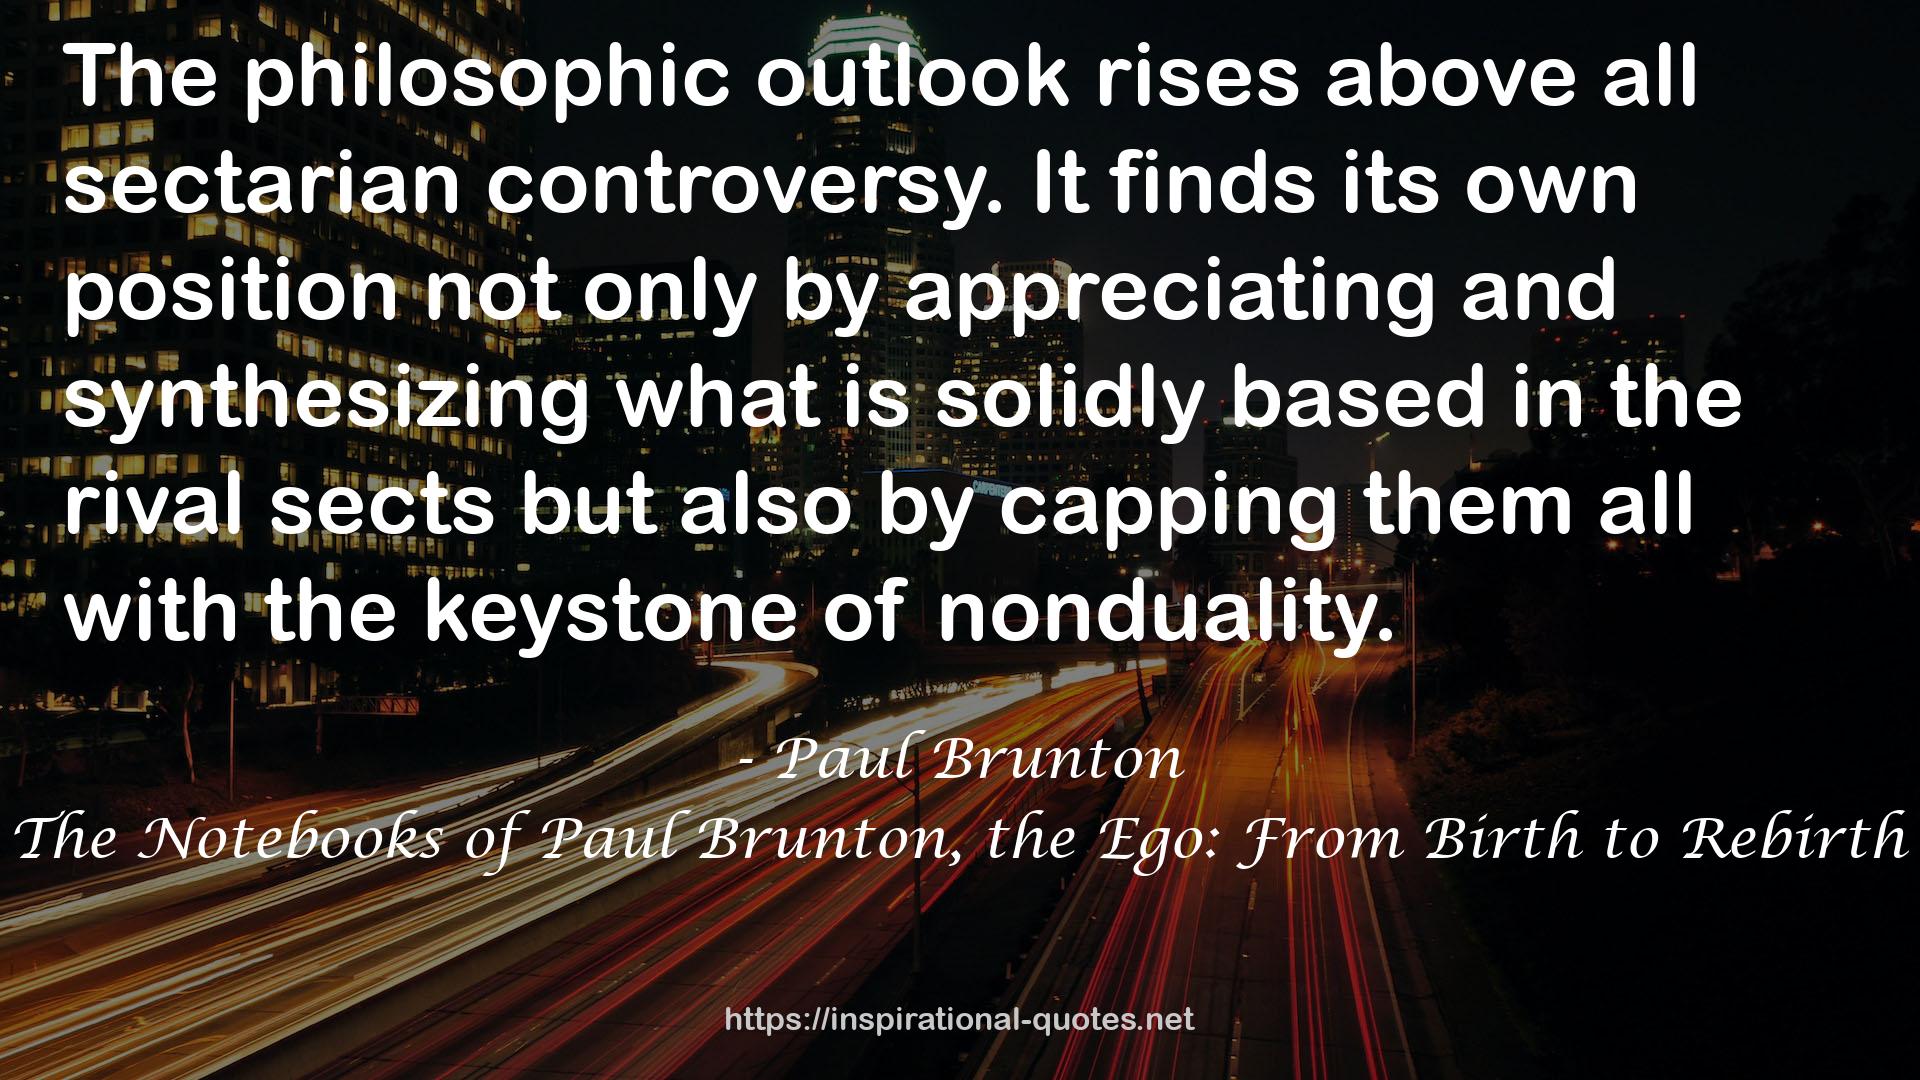 The Notebooks of Paul Brunton, the Ego: From Birth to Rebirth QUOTES